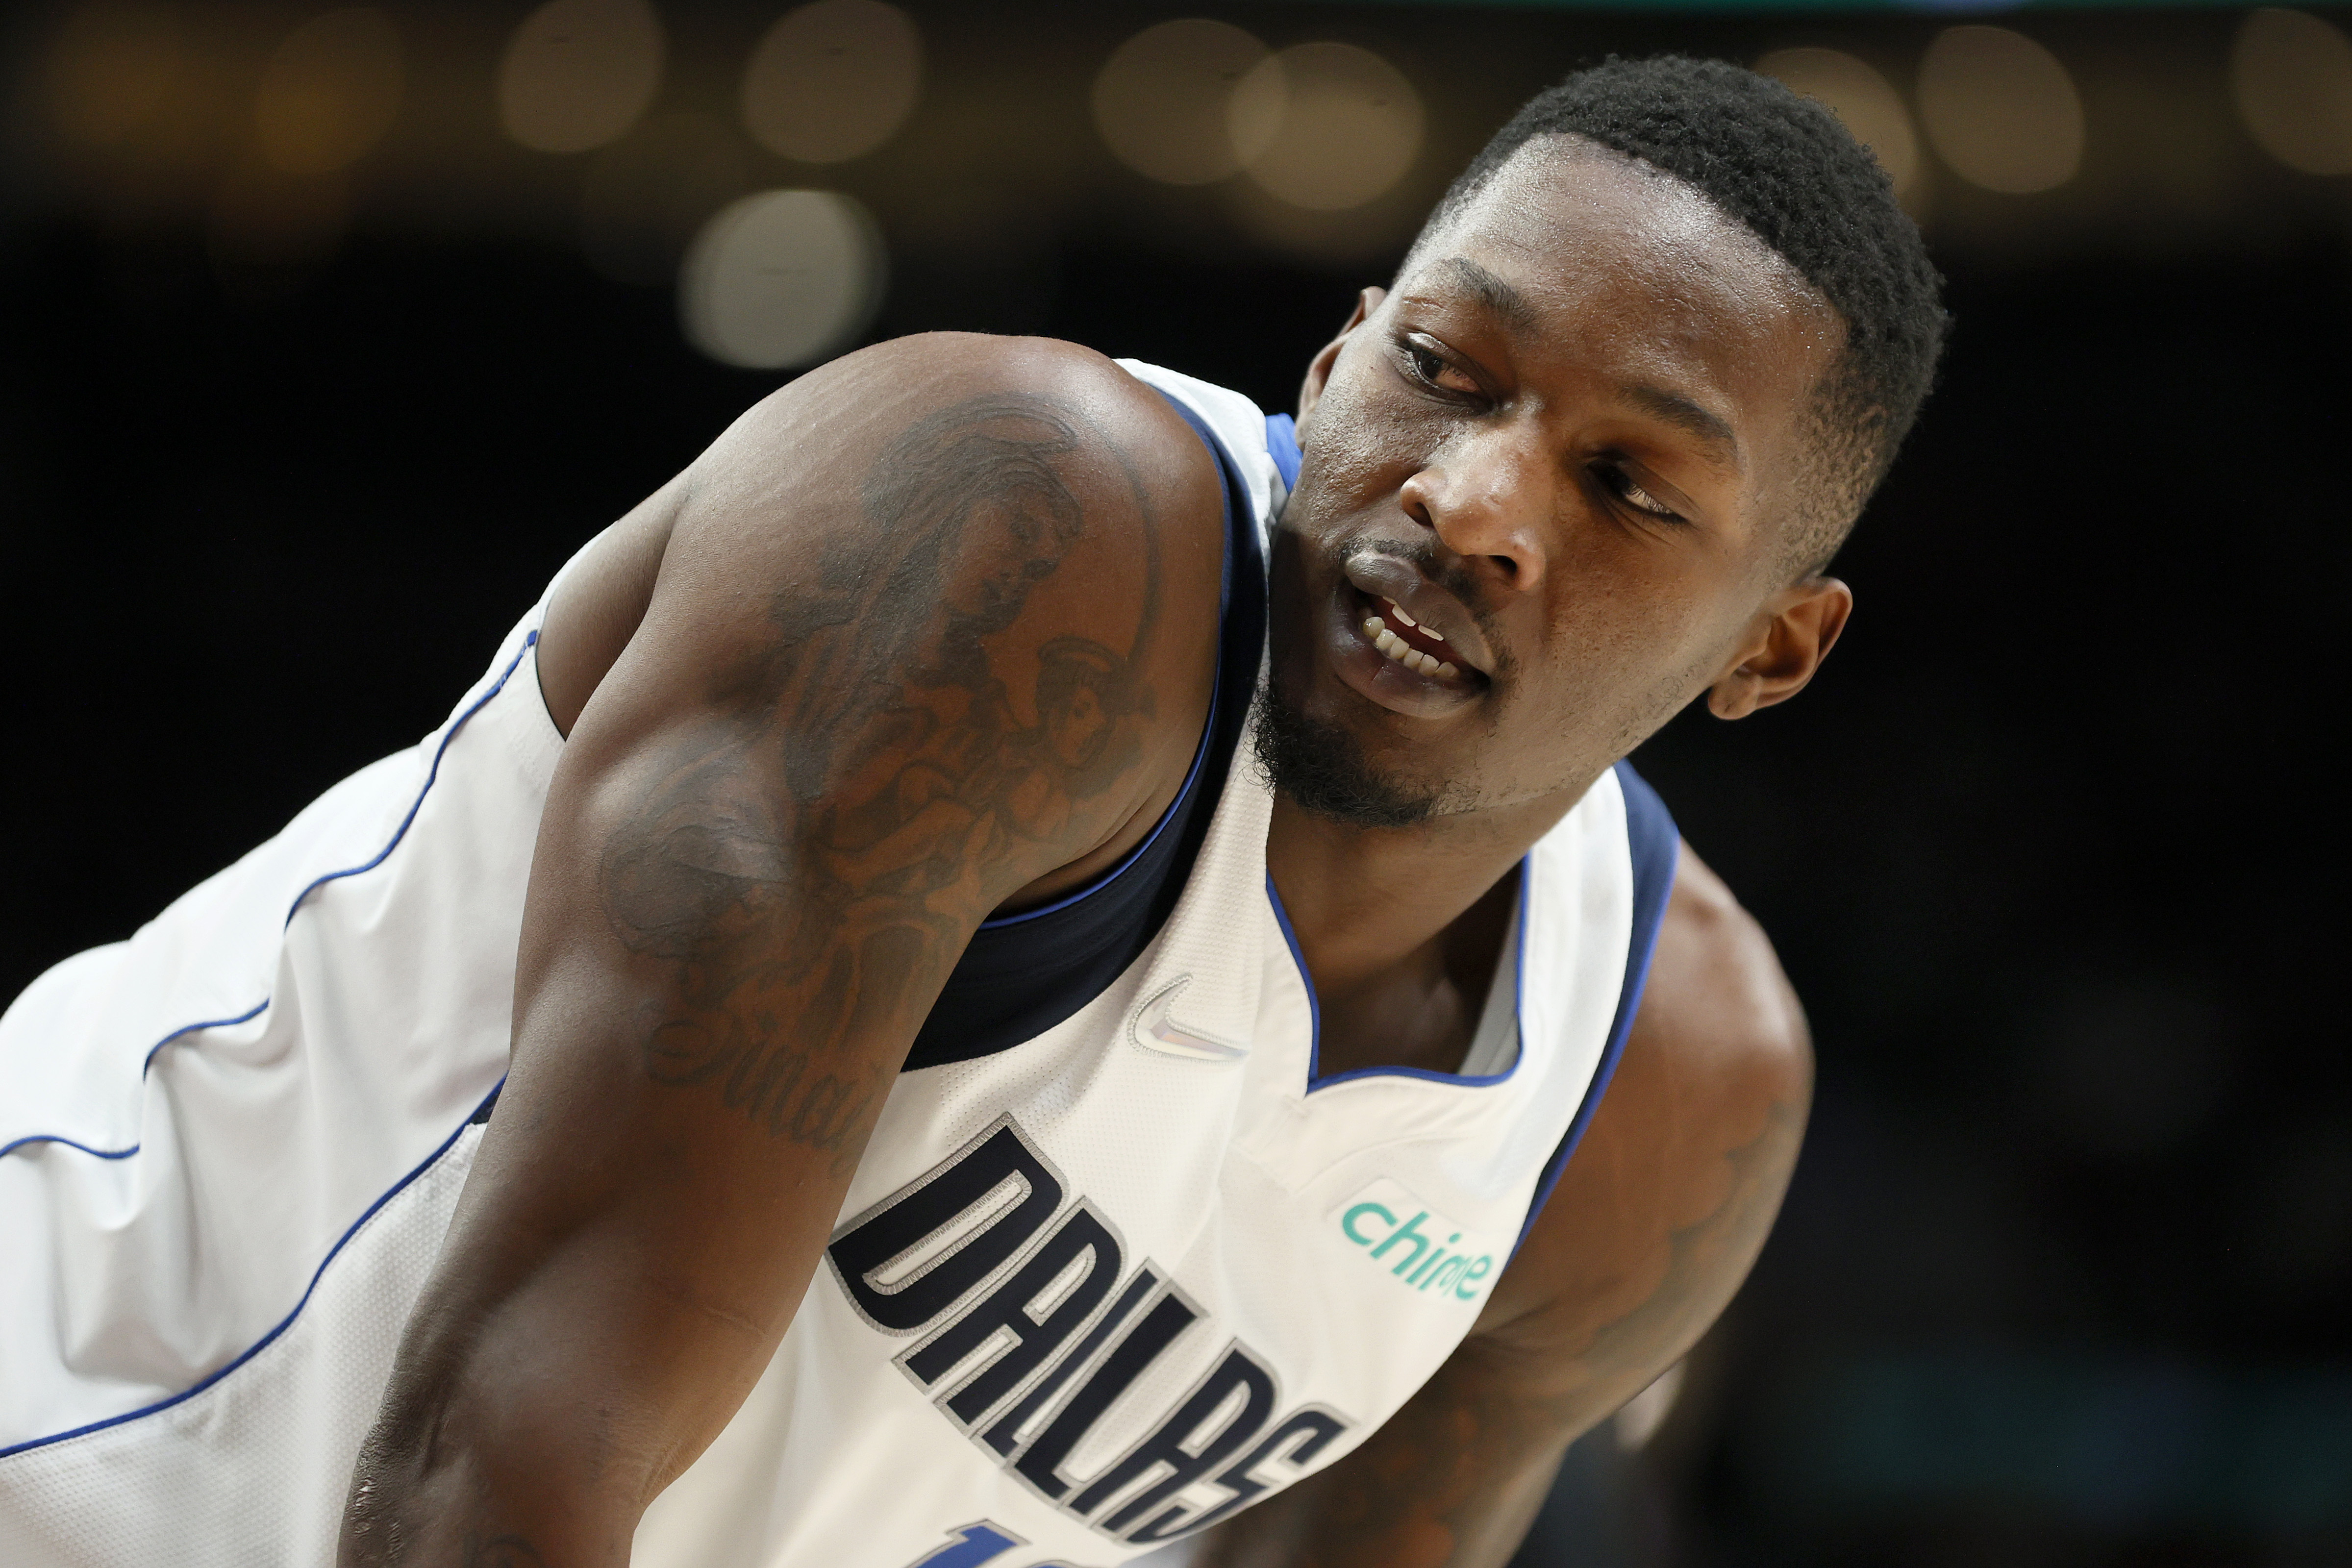 COVID-19, 4-day power outage, baby on the way: Dorian Finney-Smith leads  Mavs in off-court chaos